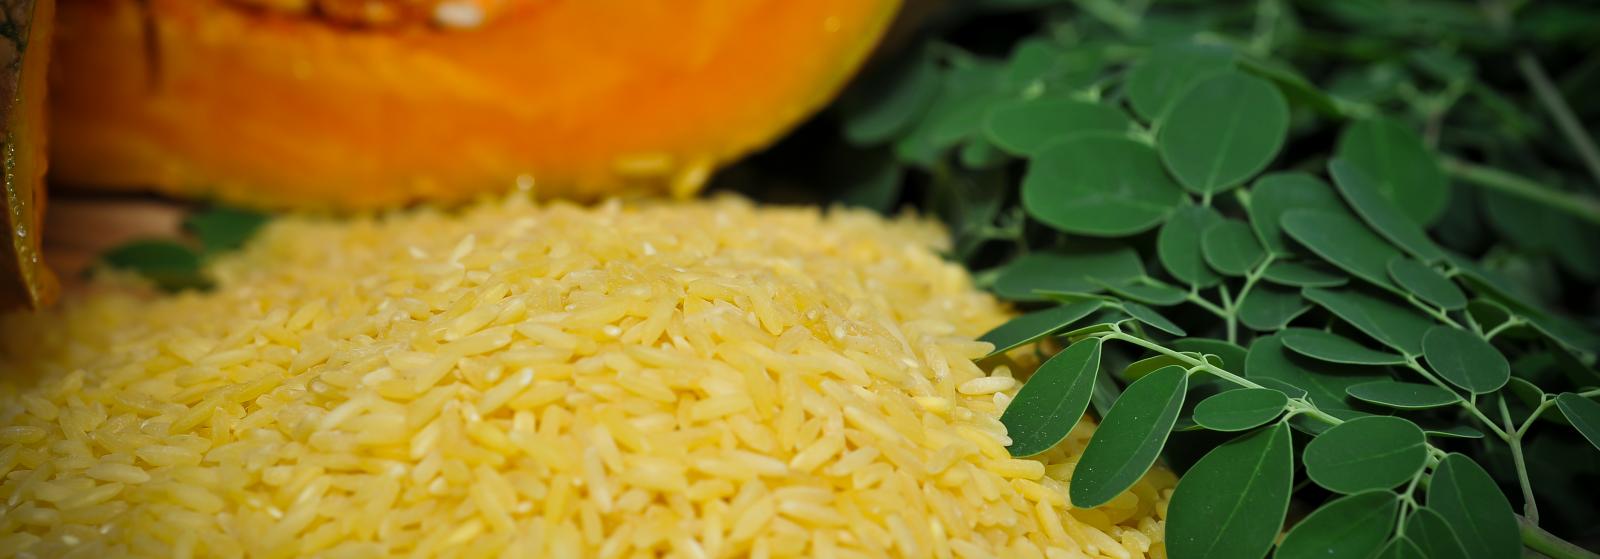 Philippines Approves Golden Rice